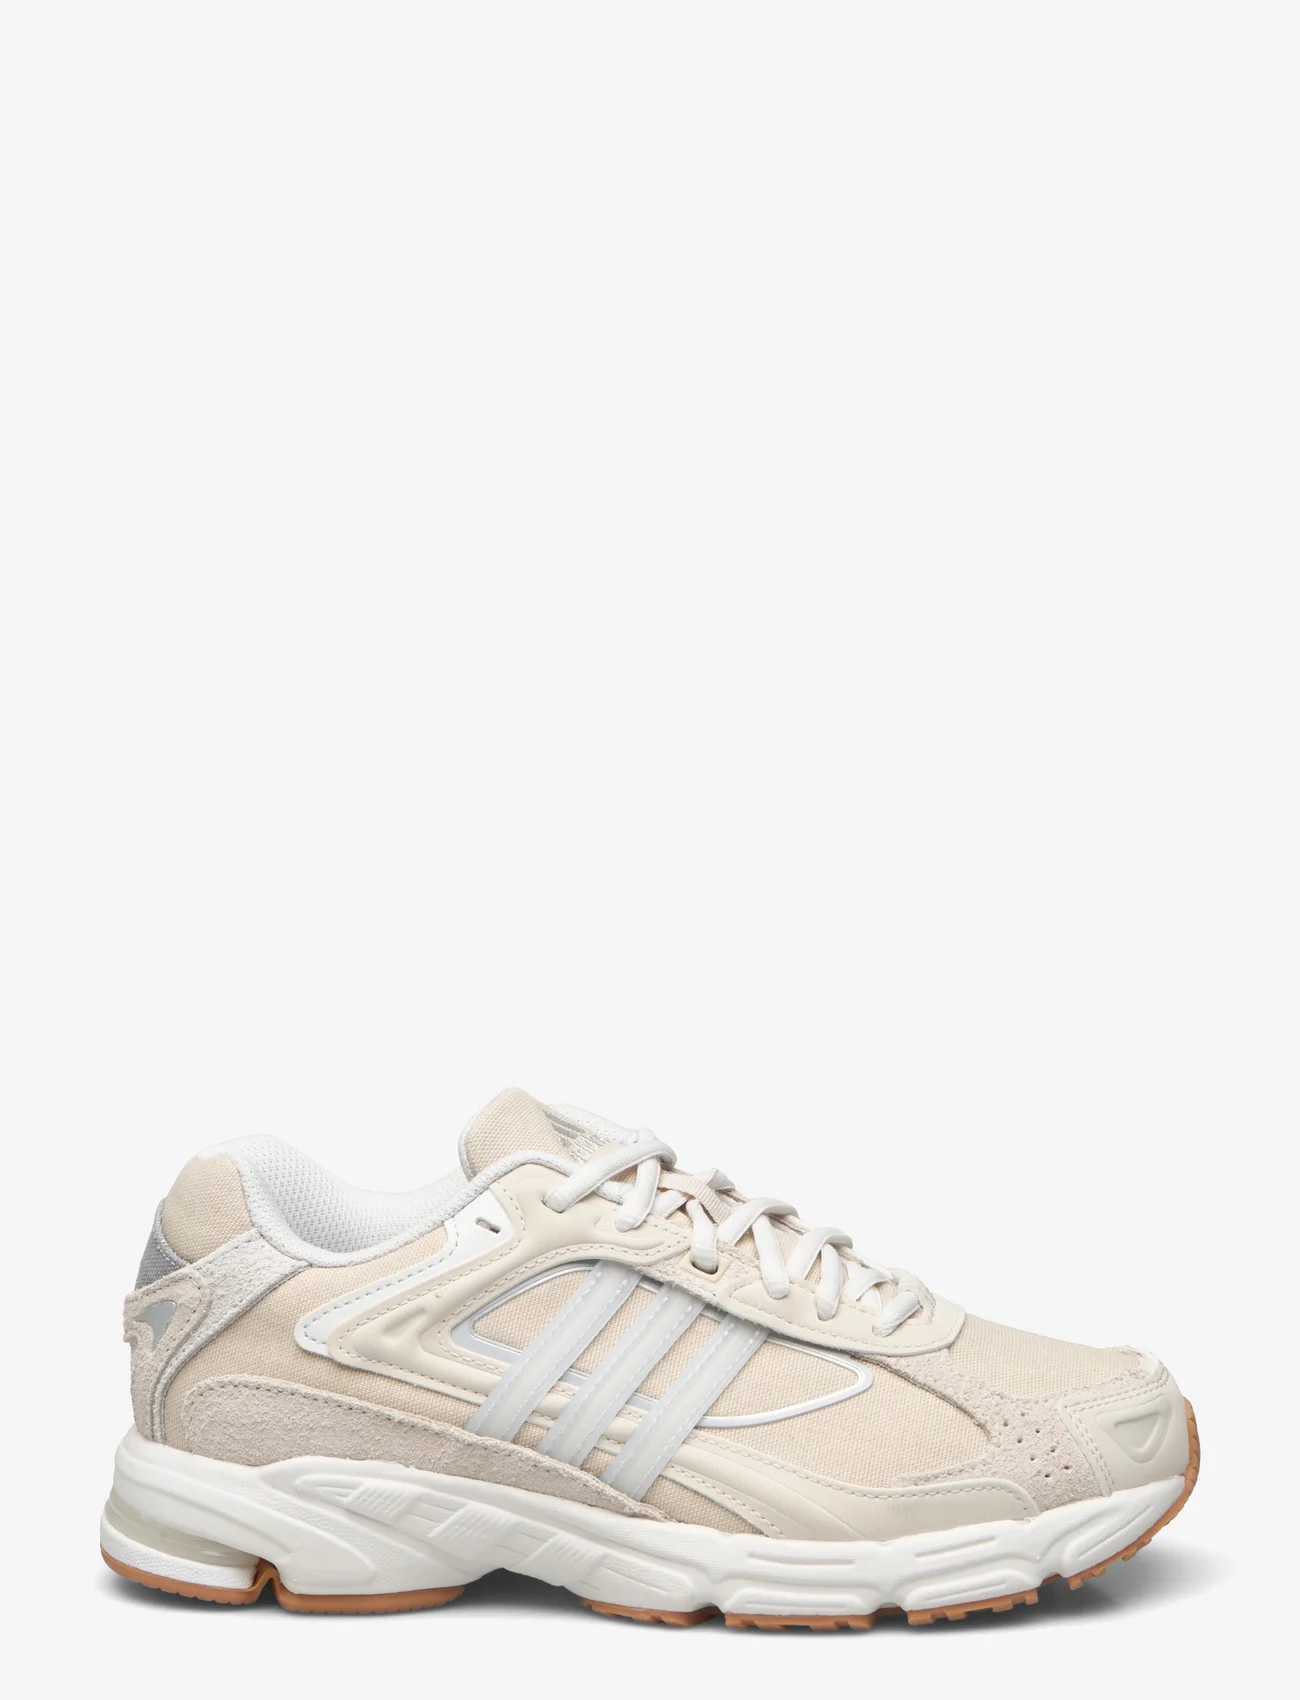 adidas Originals - RESPONSE CL W - chunky sneakers - alumin/crywht/cwhite - 1